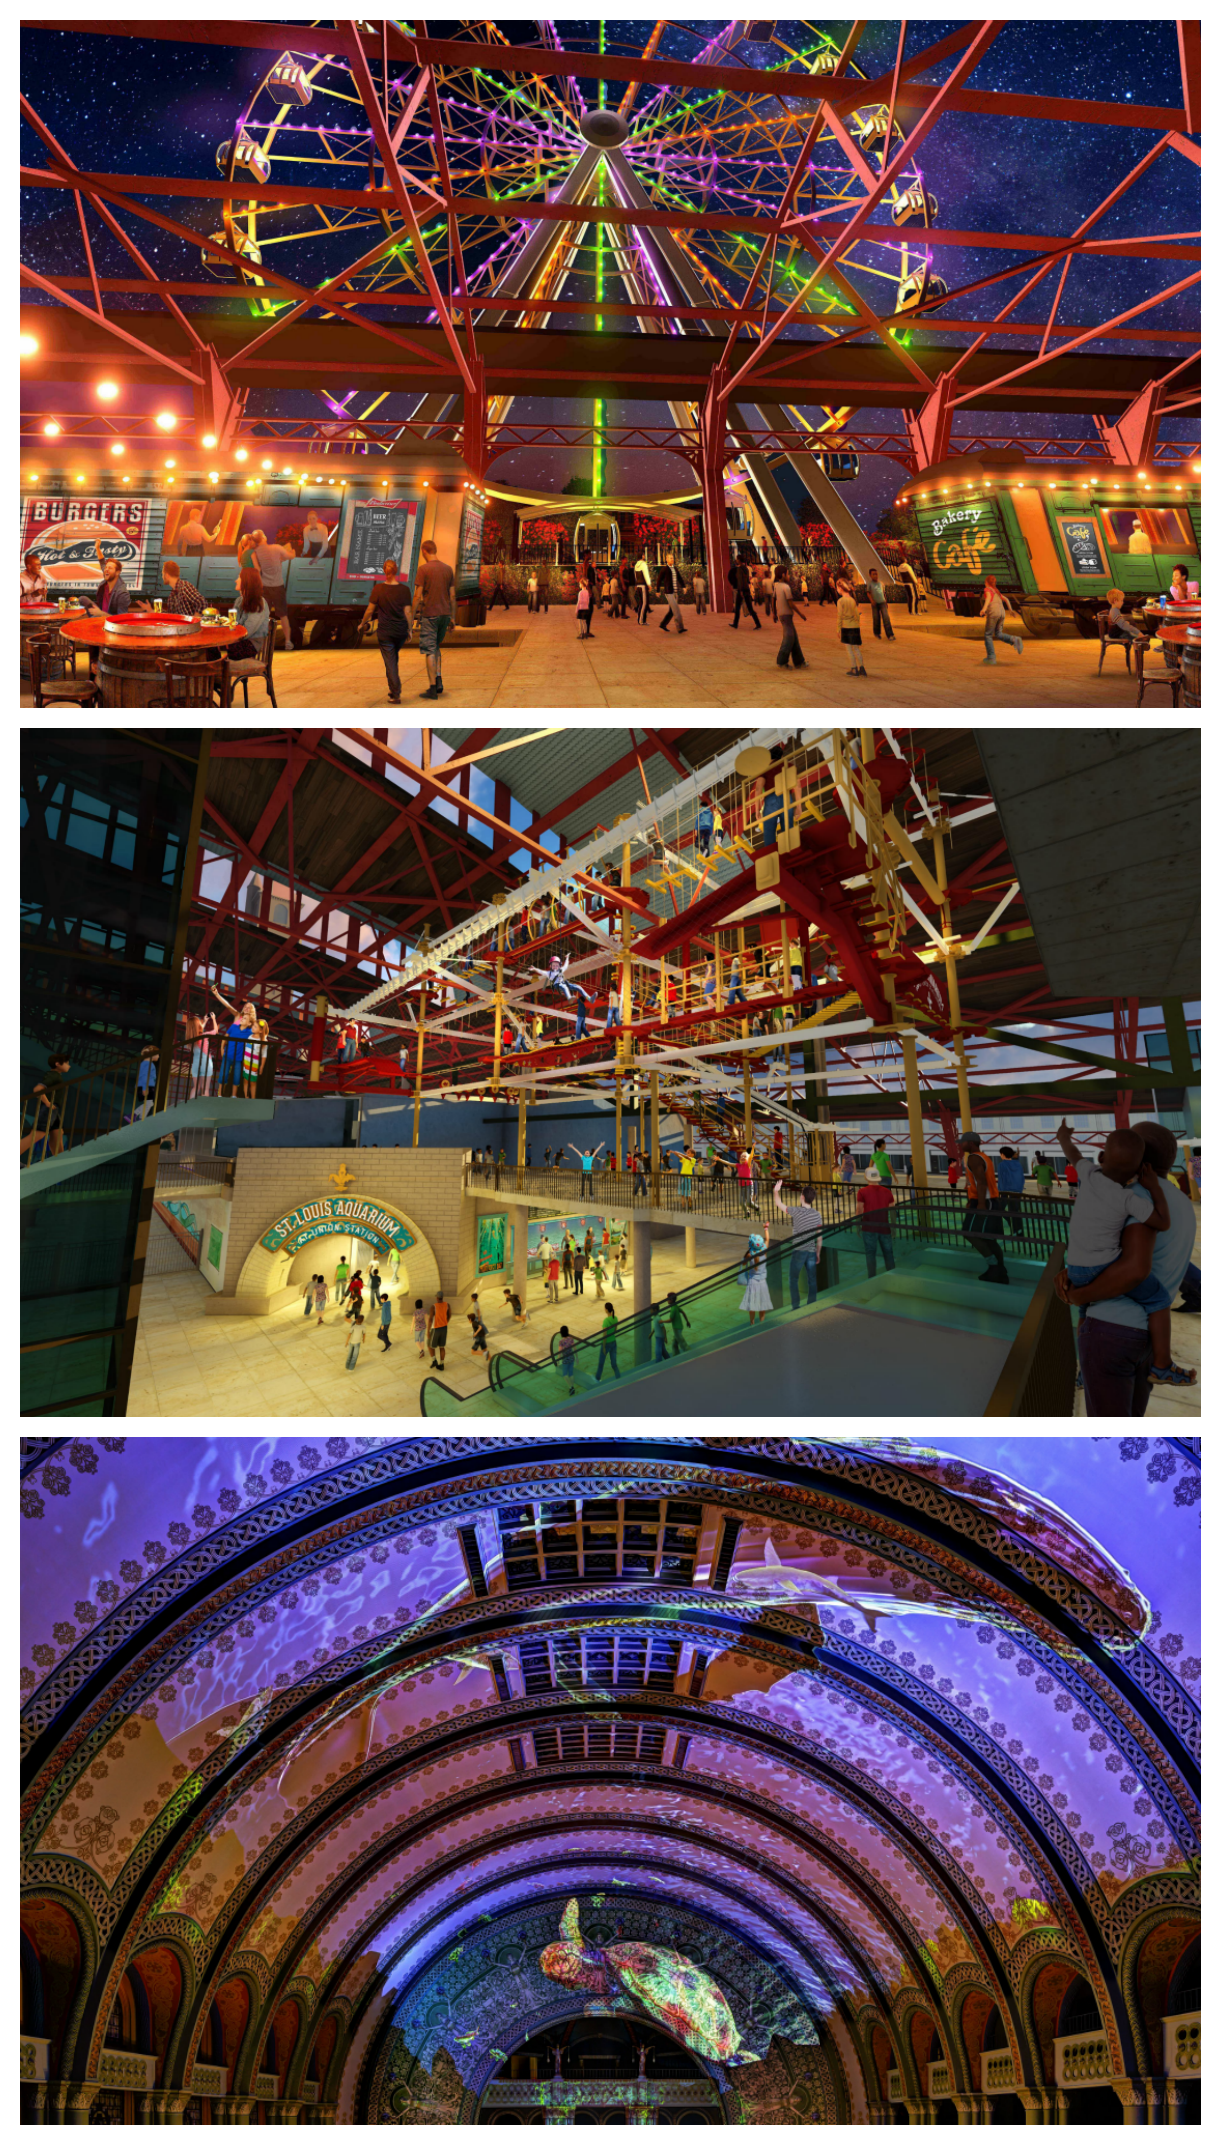 Union Station Grand Hall. St. Louis Wheel, ropes course and laser light show at St. Louis Union Station Aquarium.